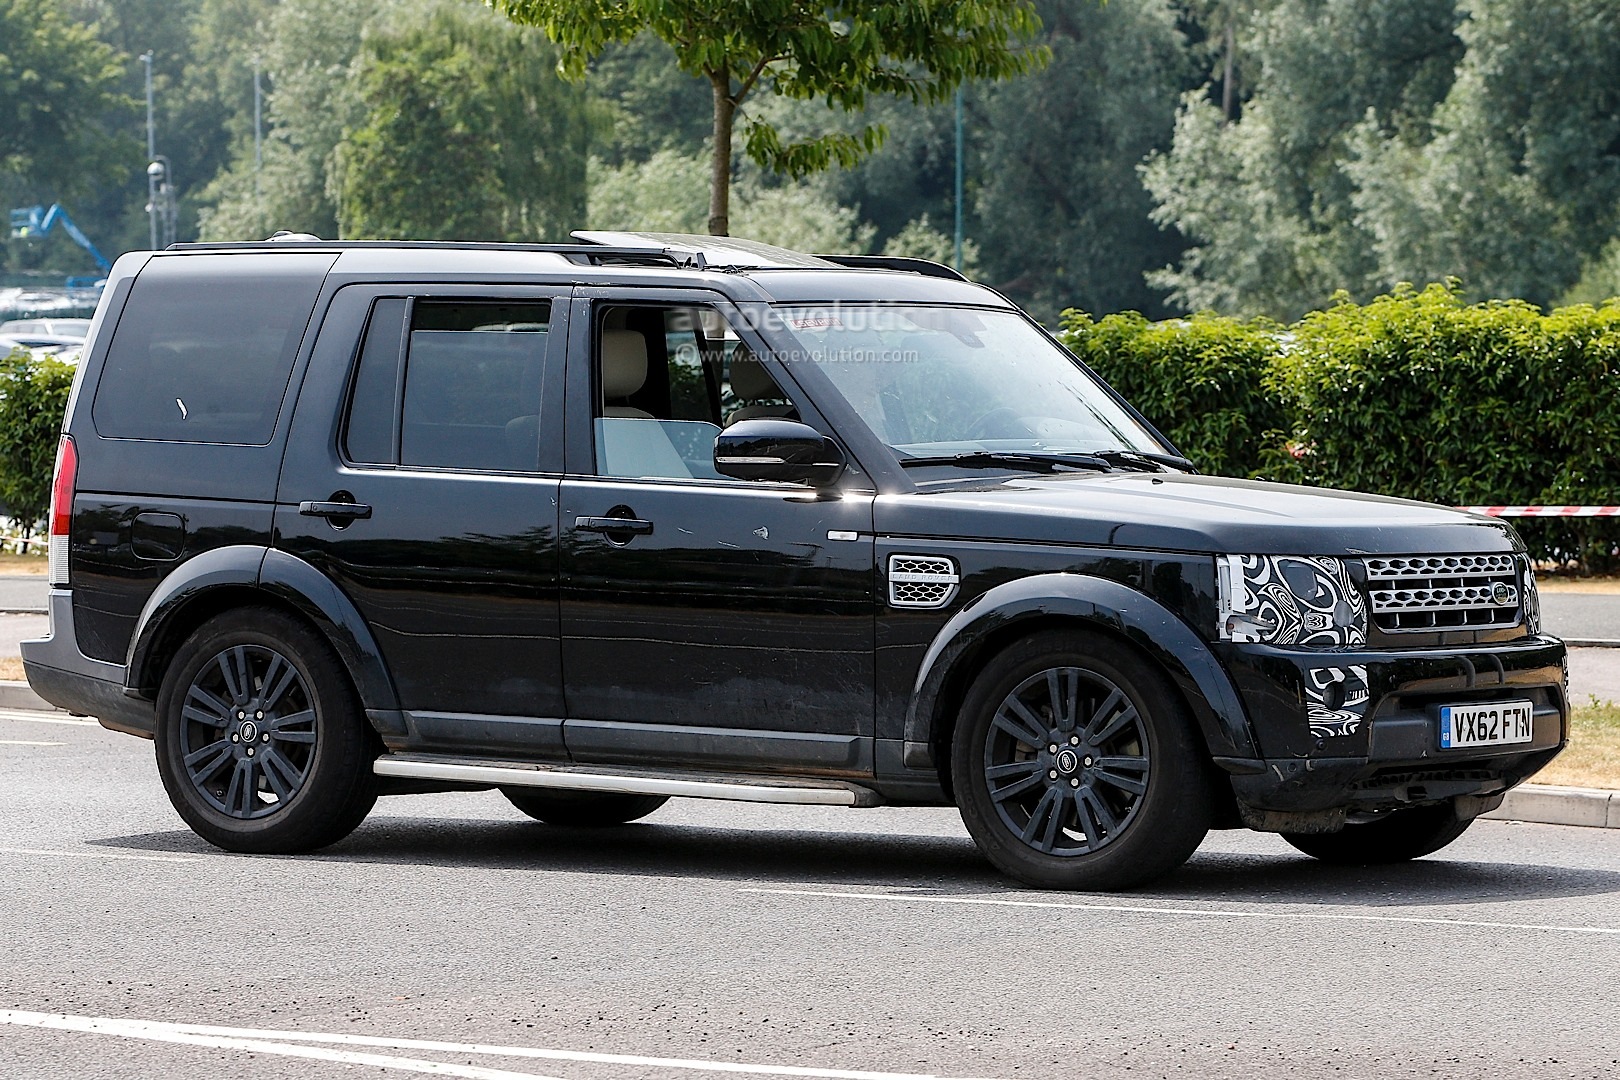 Spyshots 2014 Land Rover Discovery Facelift autoevolution